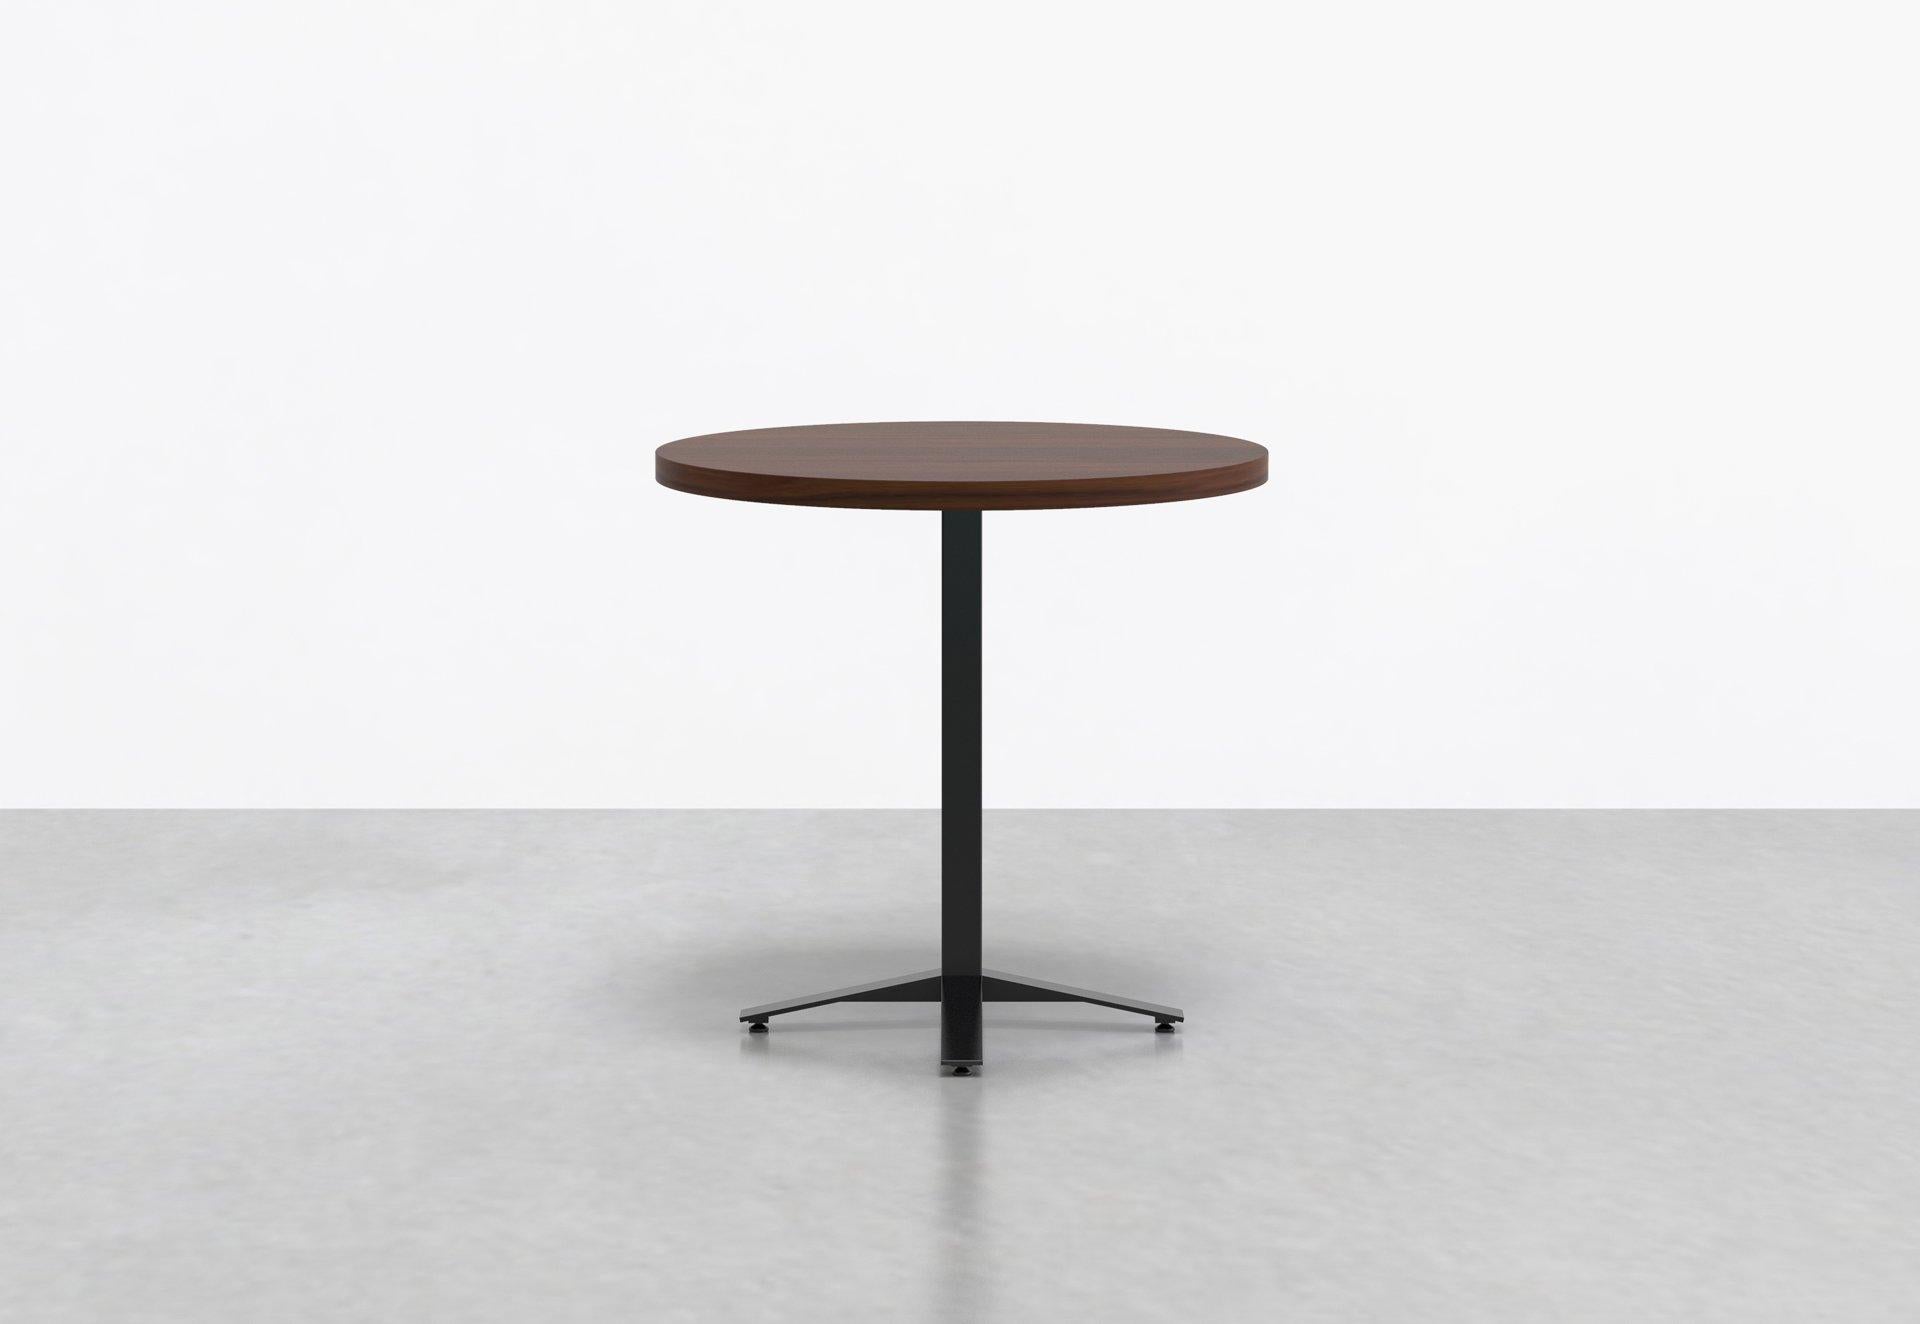 Sleek and sturdy, our perch cafe tables are available with round or square tops, and easily fit into common and dining areas. The perch is designed for high-traffic commercial use, and have been a favourite with many restaurant clients. Its